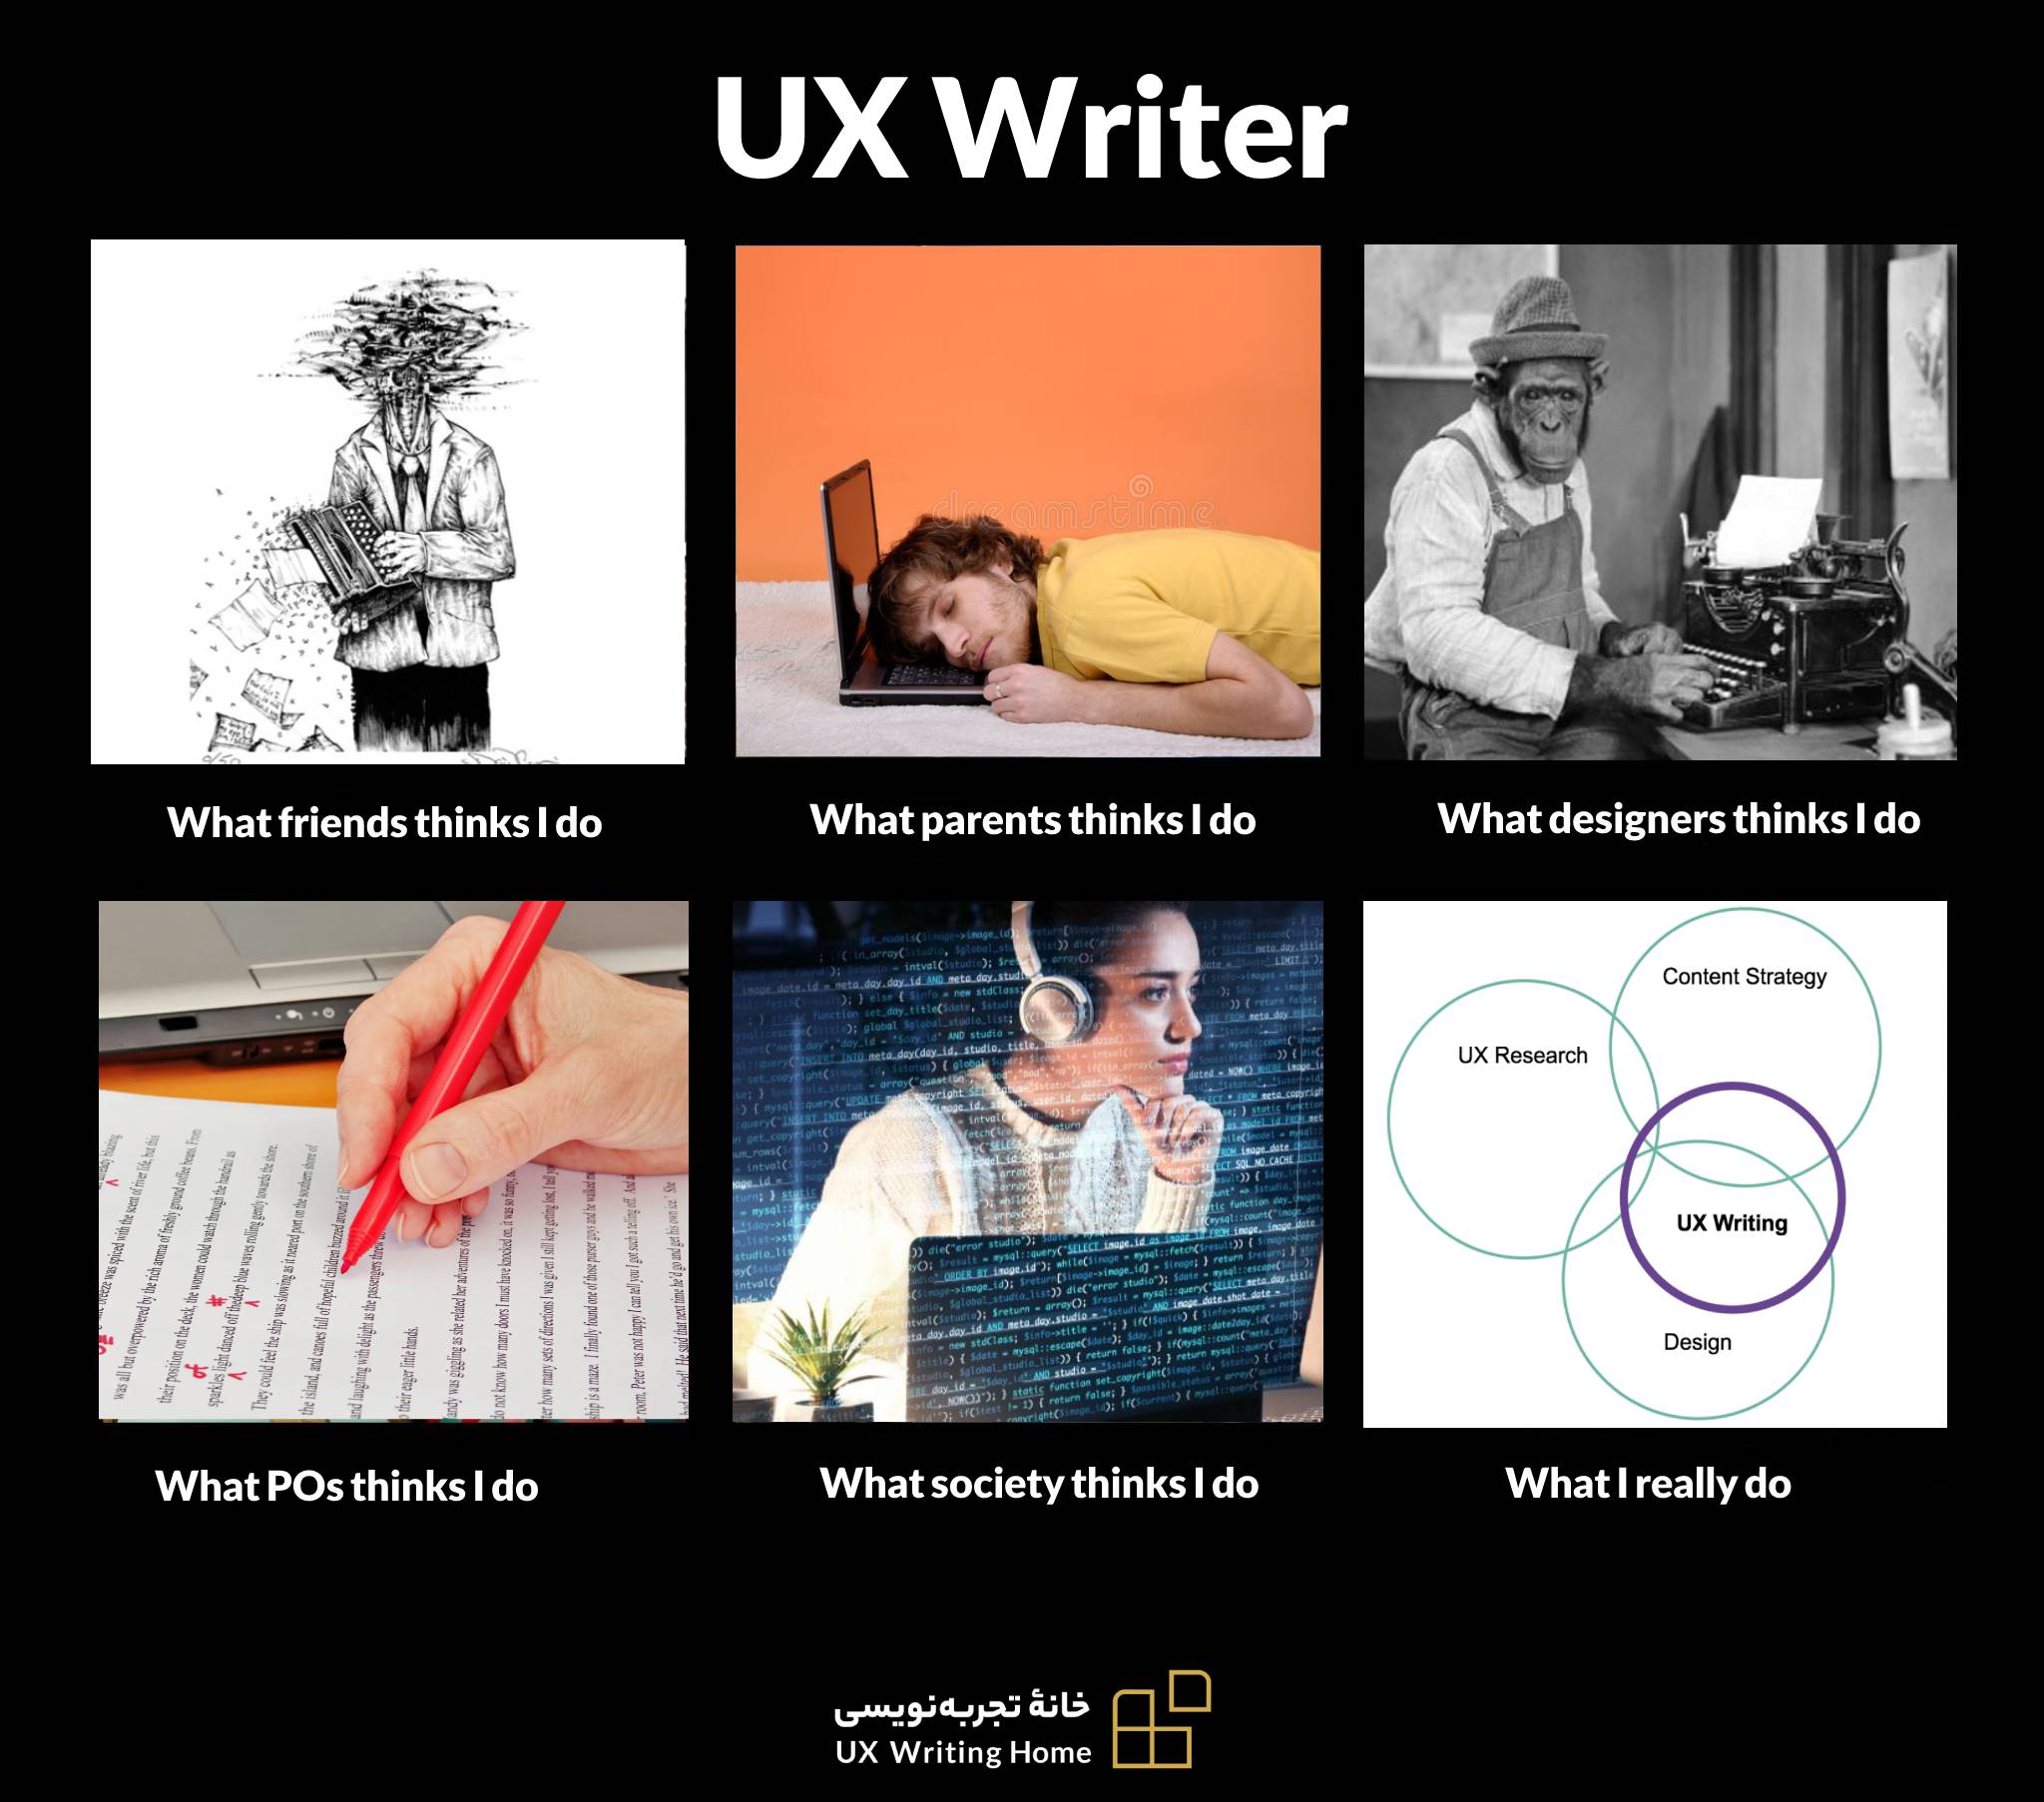 An UX writer isn't part of a production line. Words are an integral and crucial element of any product, so UX writing is part of design. UX writing for UX designers